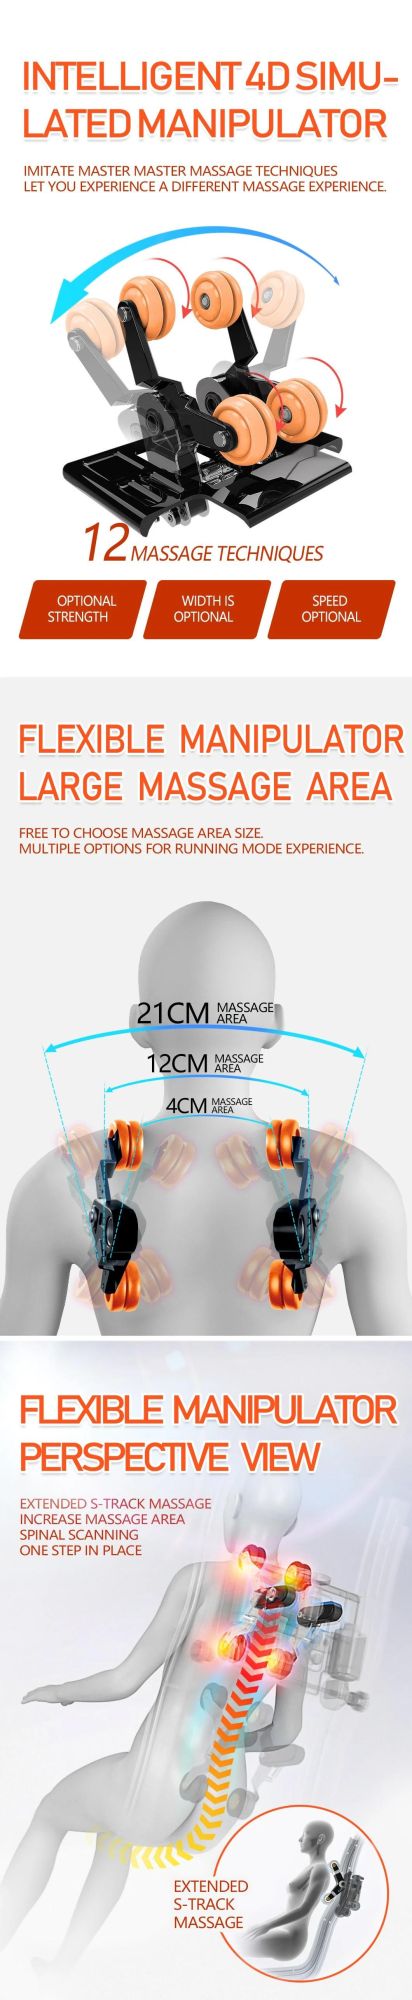 Made in China Hot Selling OEM 3D Zero Gravity Shiatsu Kneading Full Body Massage Chair for Home and Office